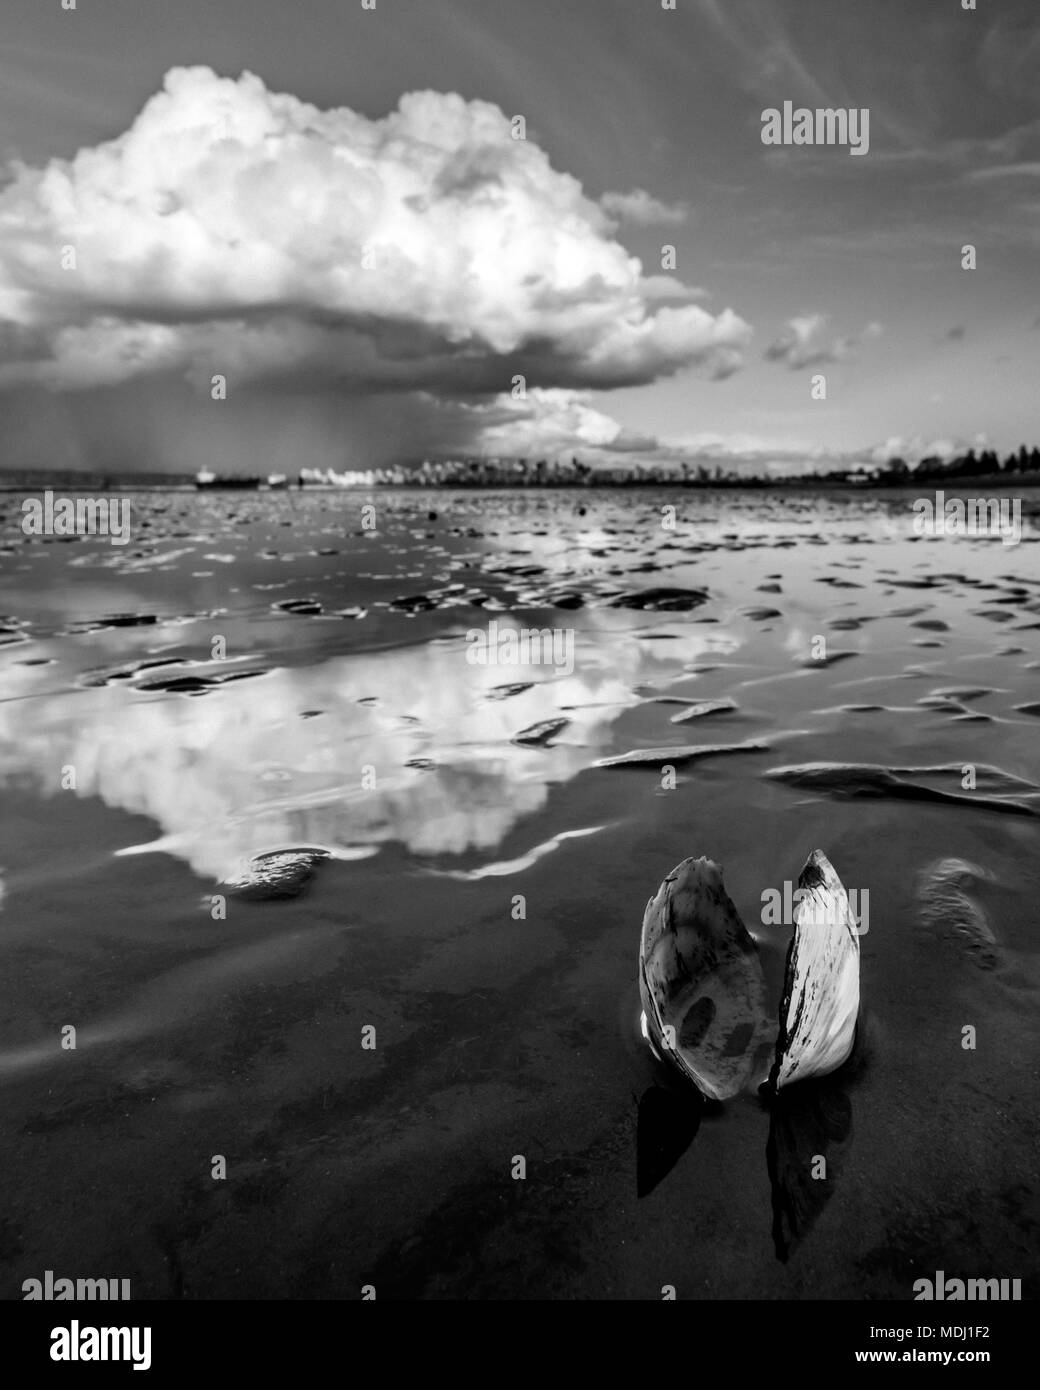 An open clam shell sits on the shore with cloud reflected on the wet sand; Vancouver, British Columbia, Canada Stock Photo